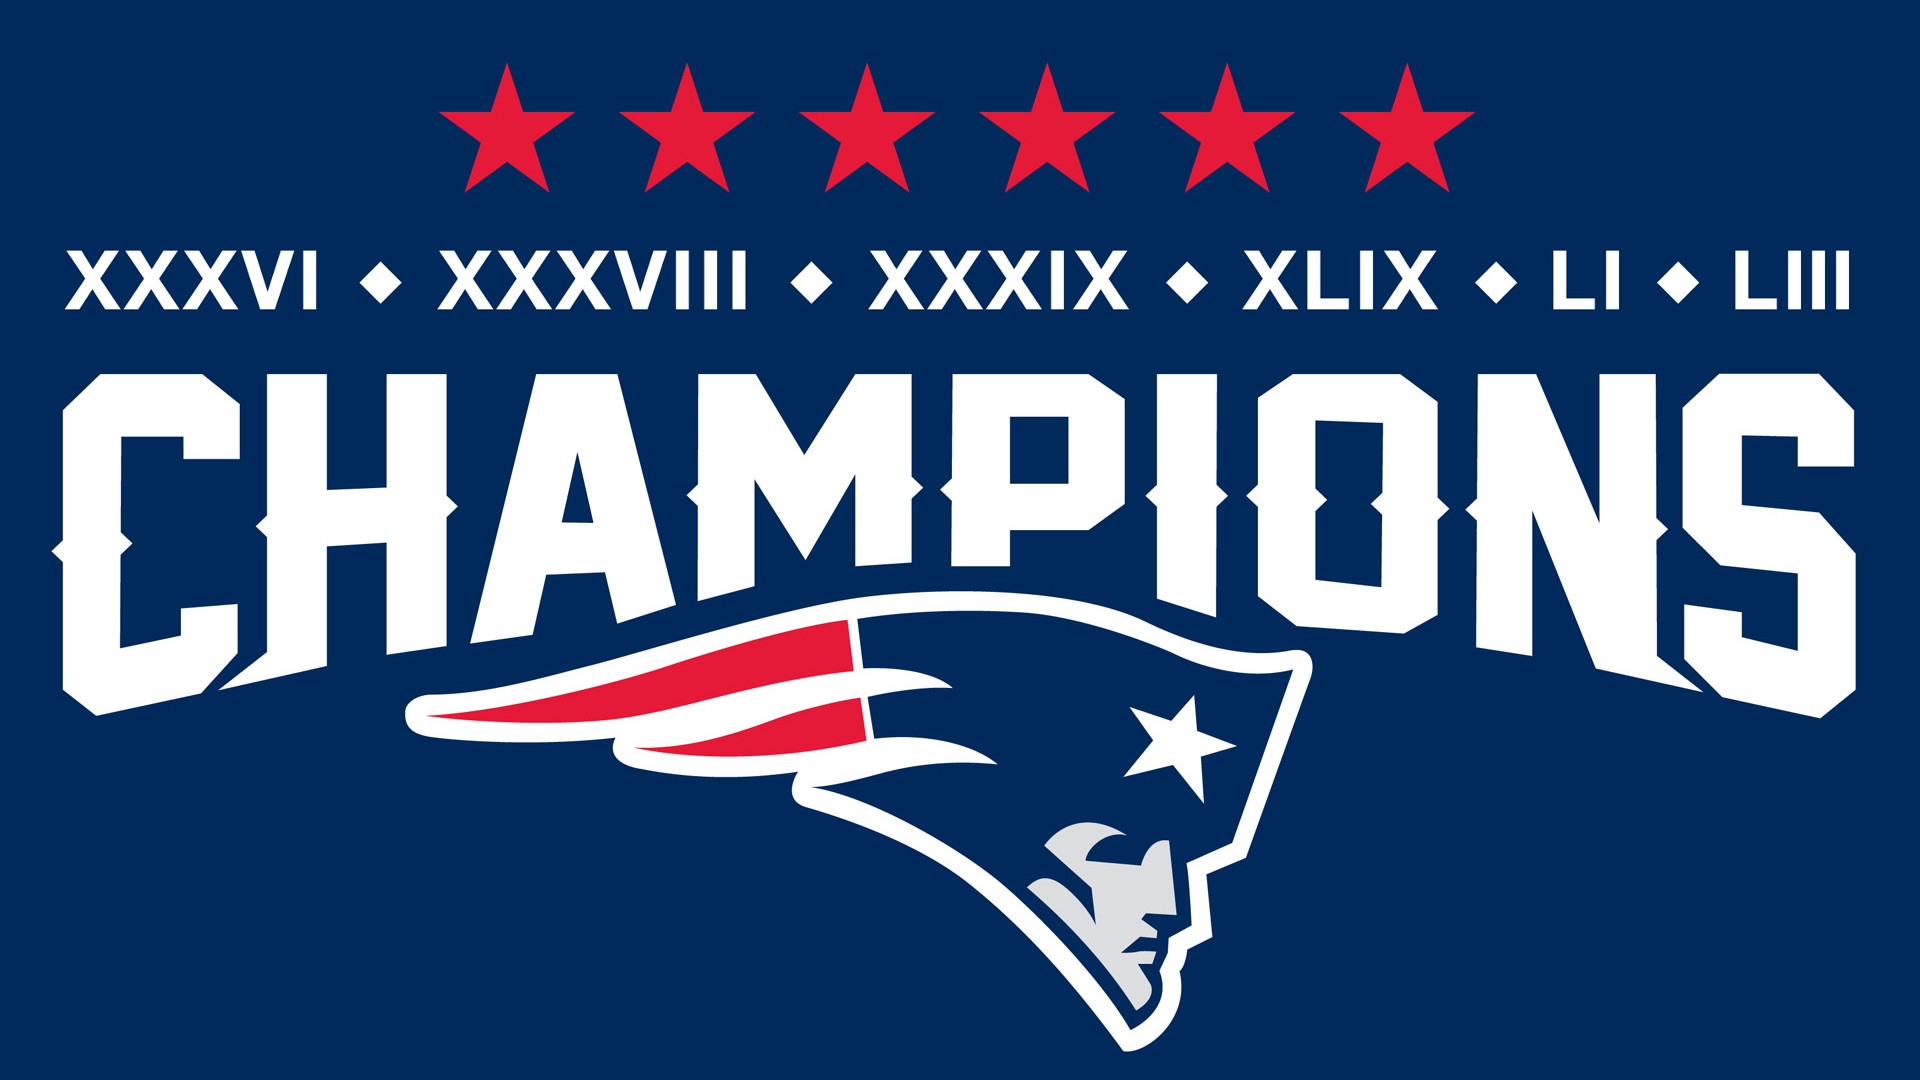 New England Patriots Desktop Backgrounds with high-resolution 1920x1080 pixel. Download and set as wallpaper for Desktop Computer, Apple iPhone X, XS Max, XR, 8, 7, 6, SE, iPad, Android